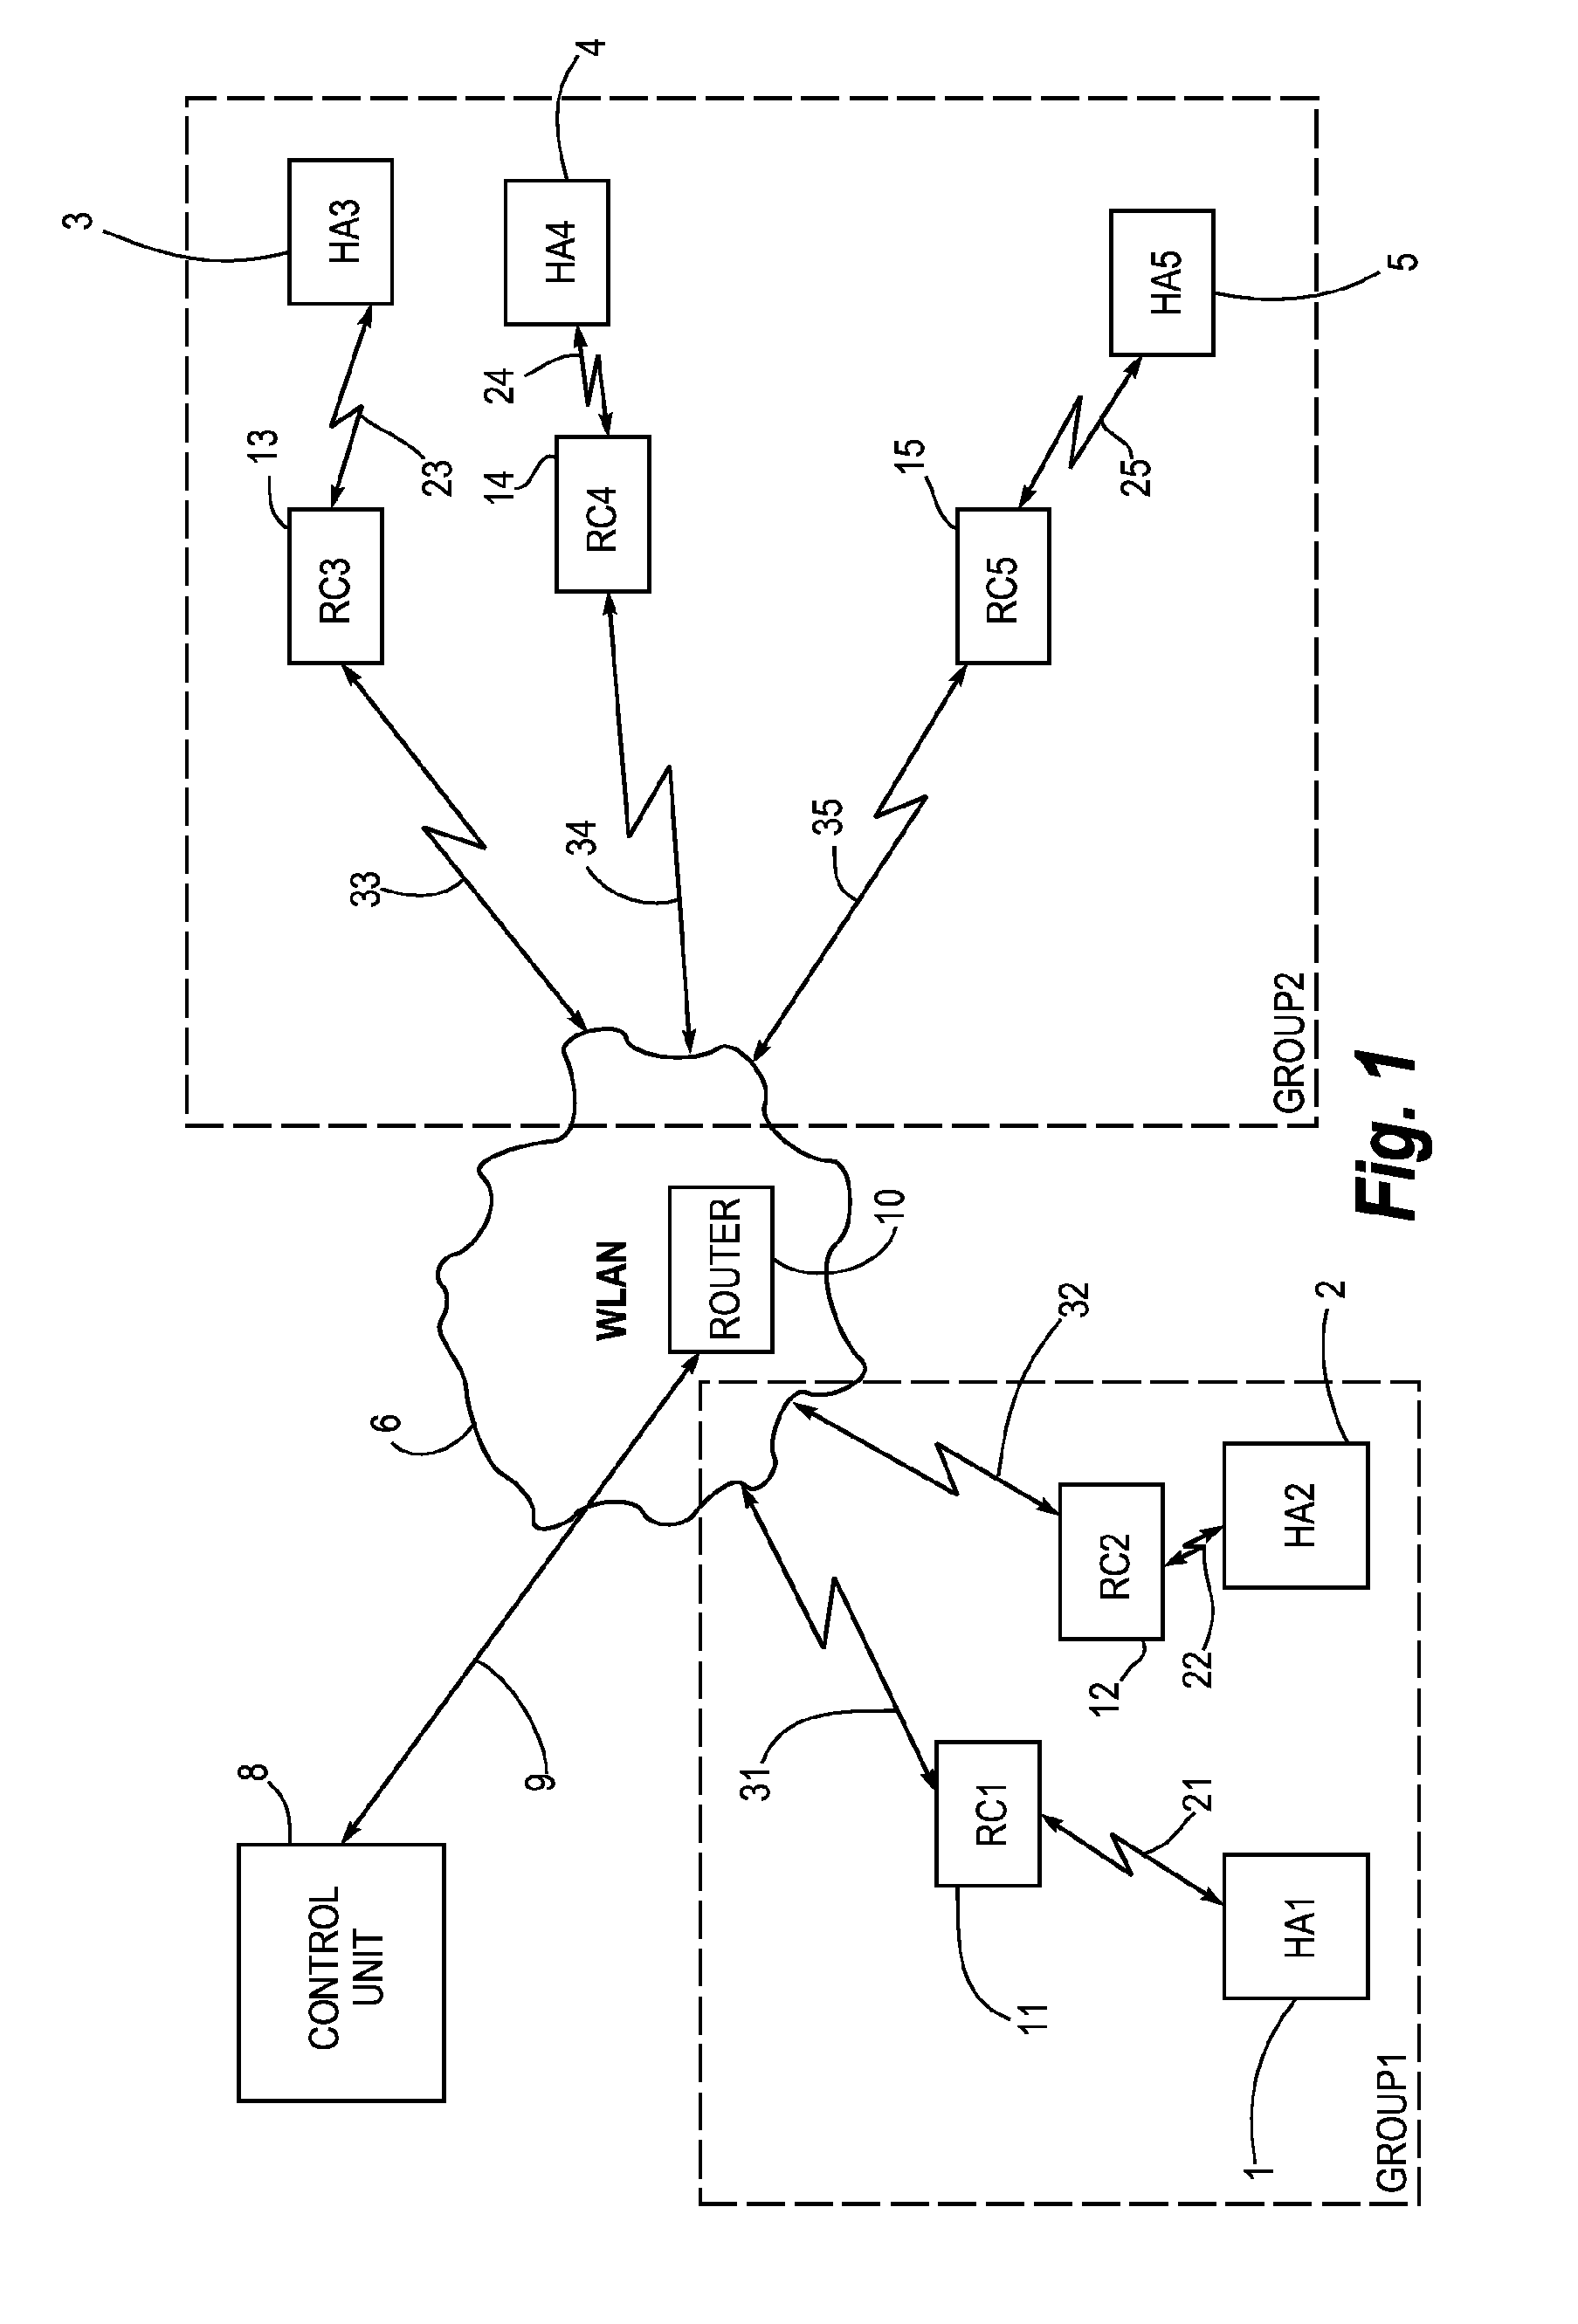 Hearing aid system for establishing a conversation group